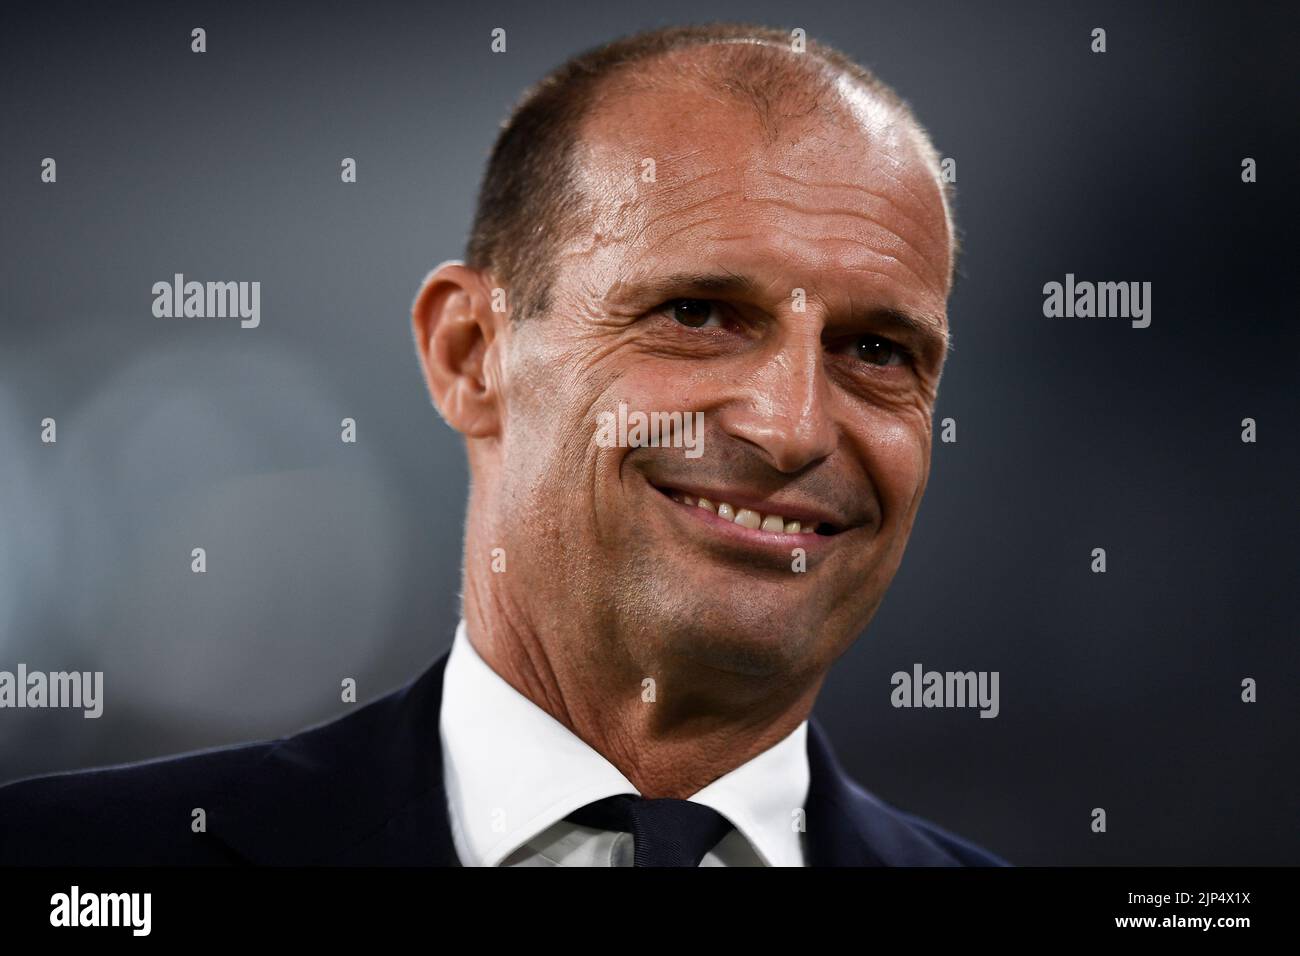 Turin, Italy. 15 August 2022. Massimiliano Allegri, head coach of Juventus FC, looks on prior to the Serie A football match between Juventus FC and US Sassuolo. Credit: Nicolò Campo/Alamy Live News Stock Photo